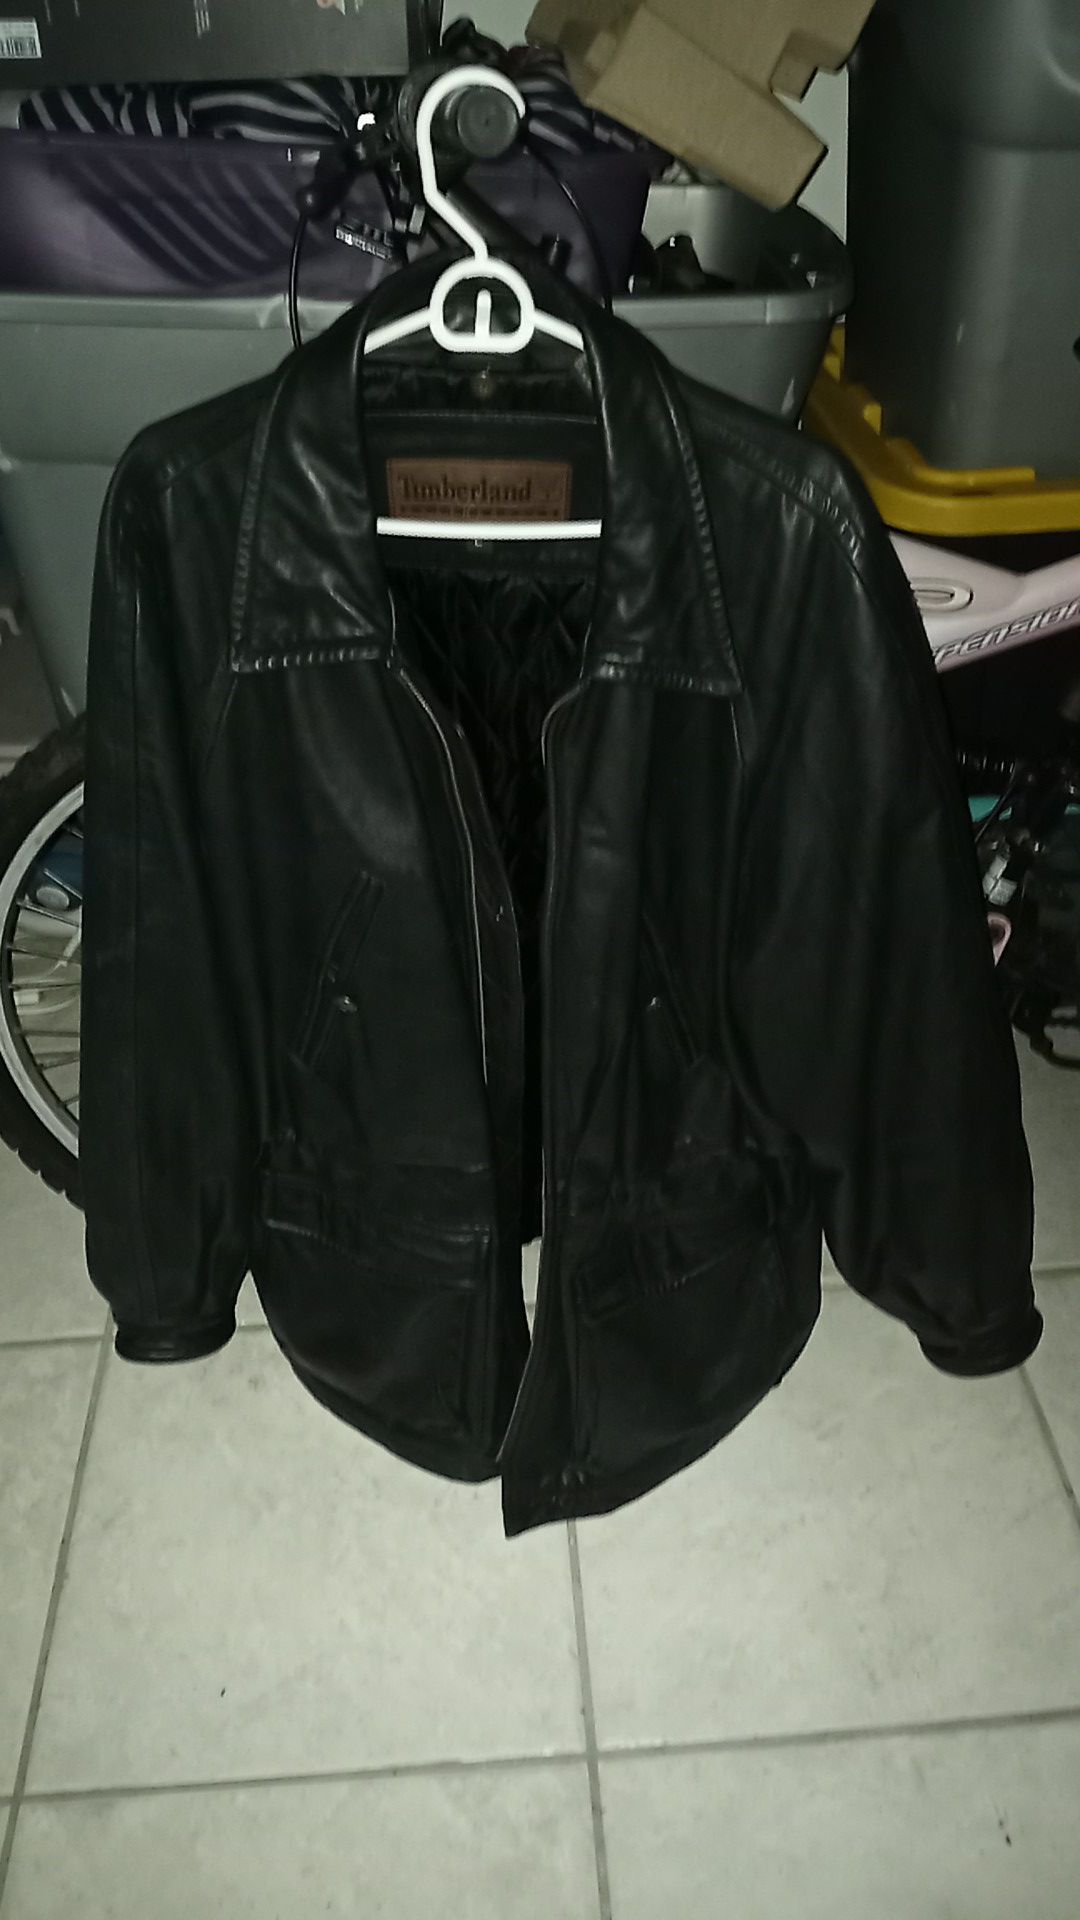 Timberland very heavy jacket for in Jacksonville, FL -